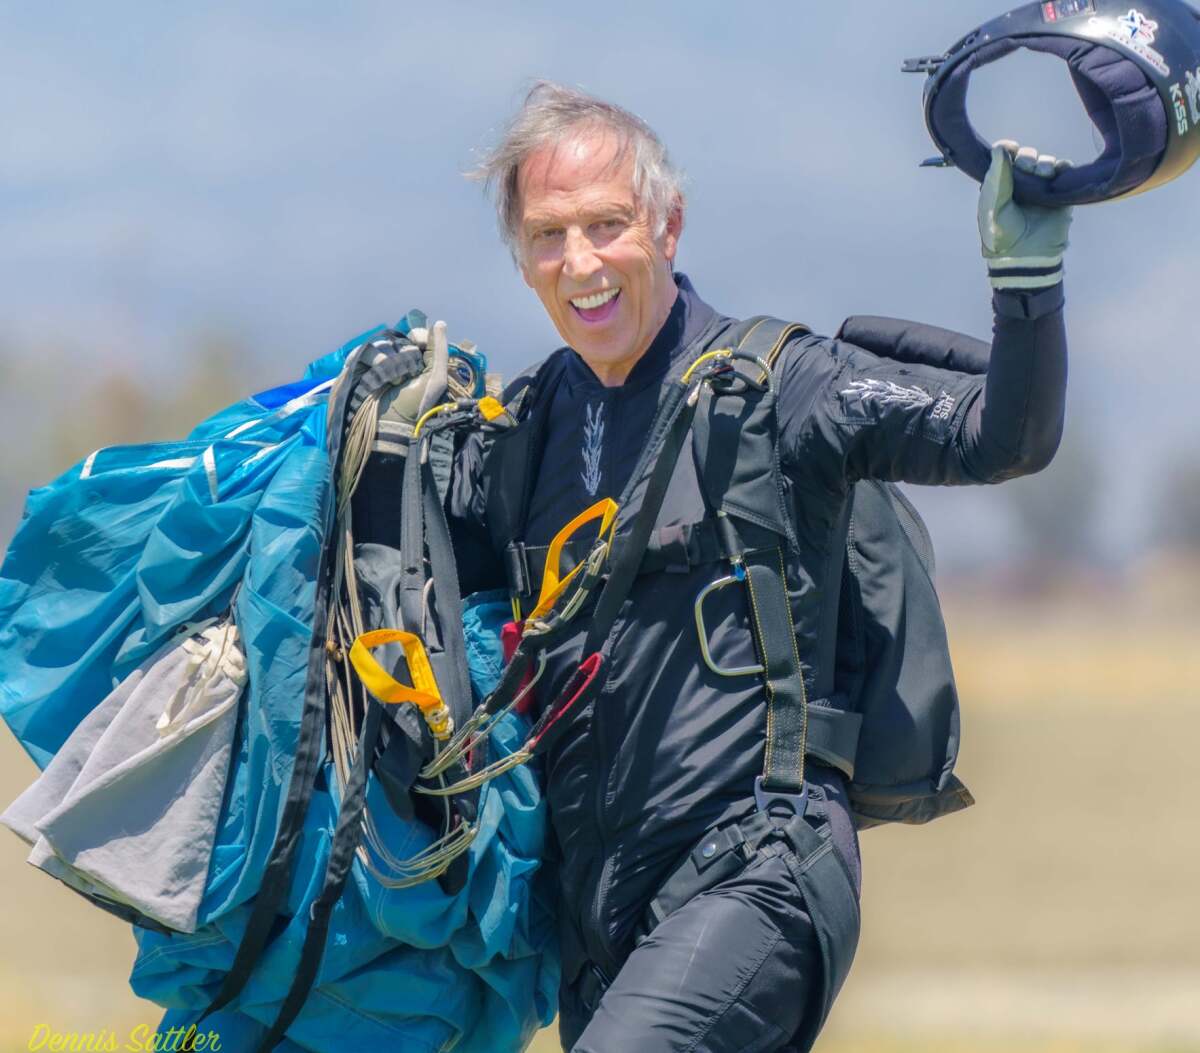 UCSD professor Steve Briggs participated in a group of skydivers older than 60 who attempted a record-breaking dive.